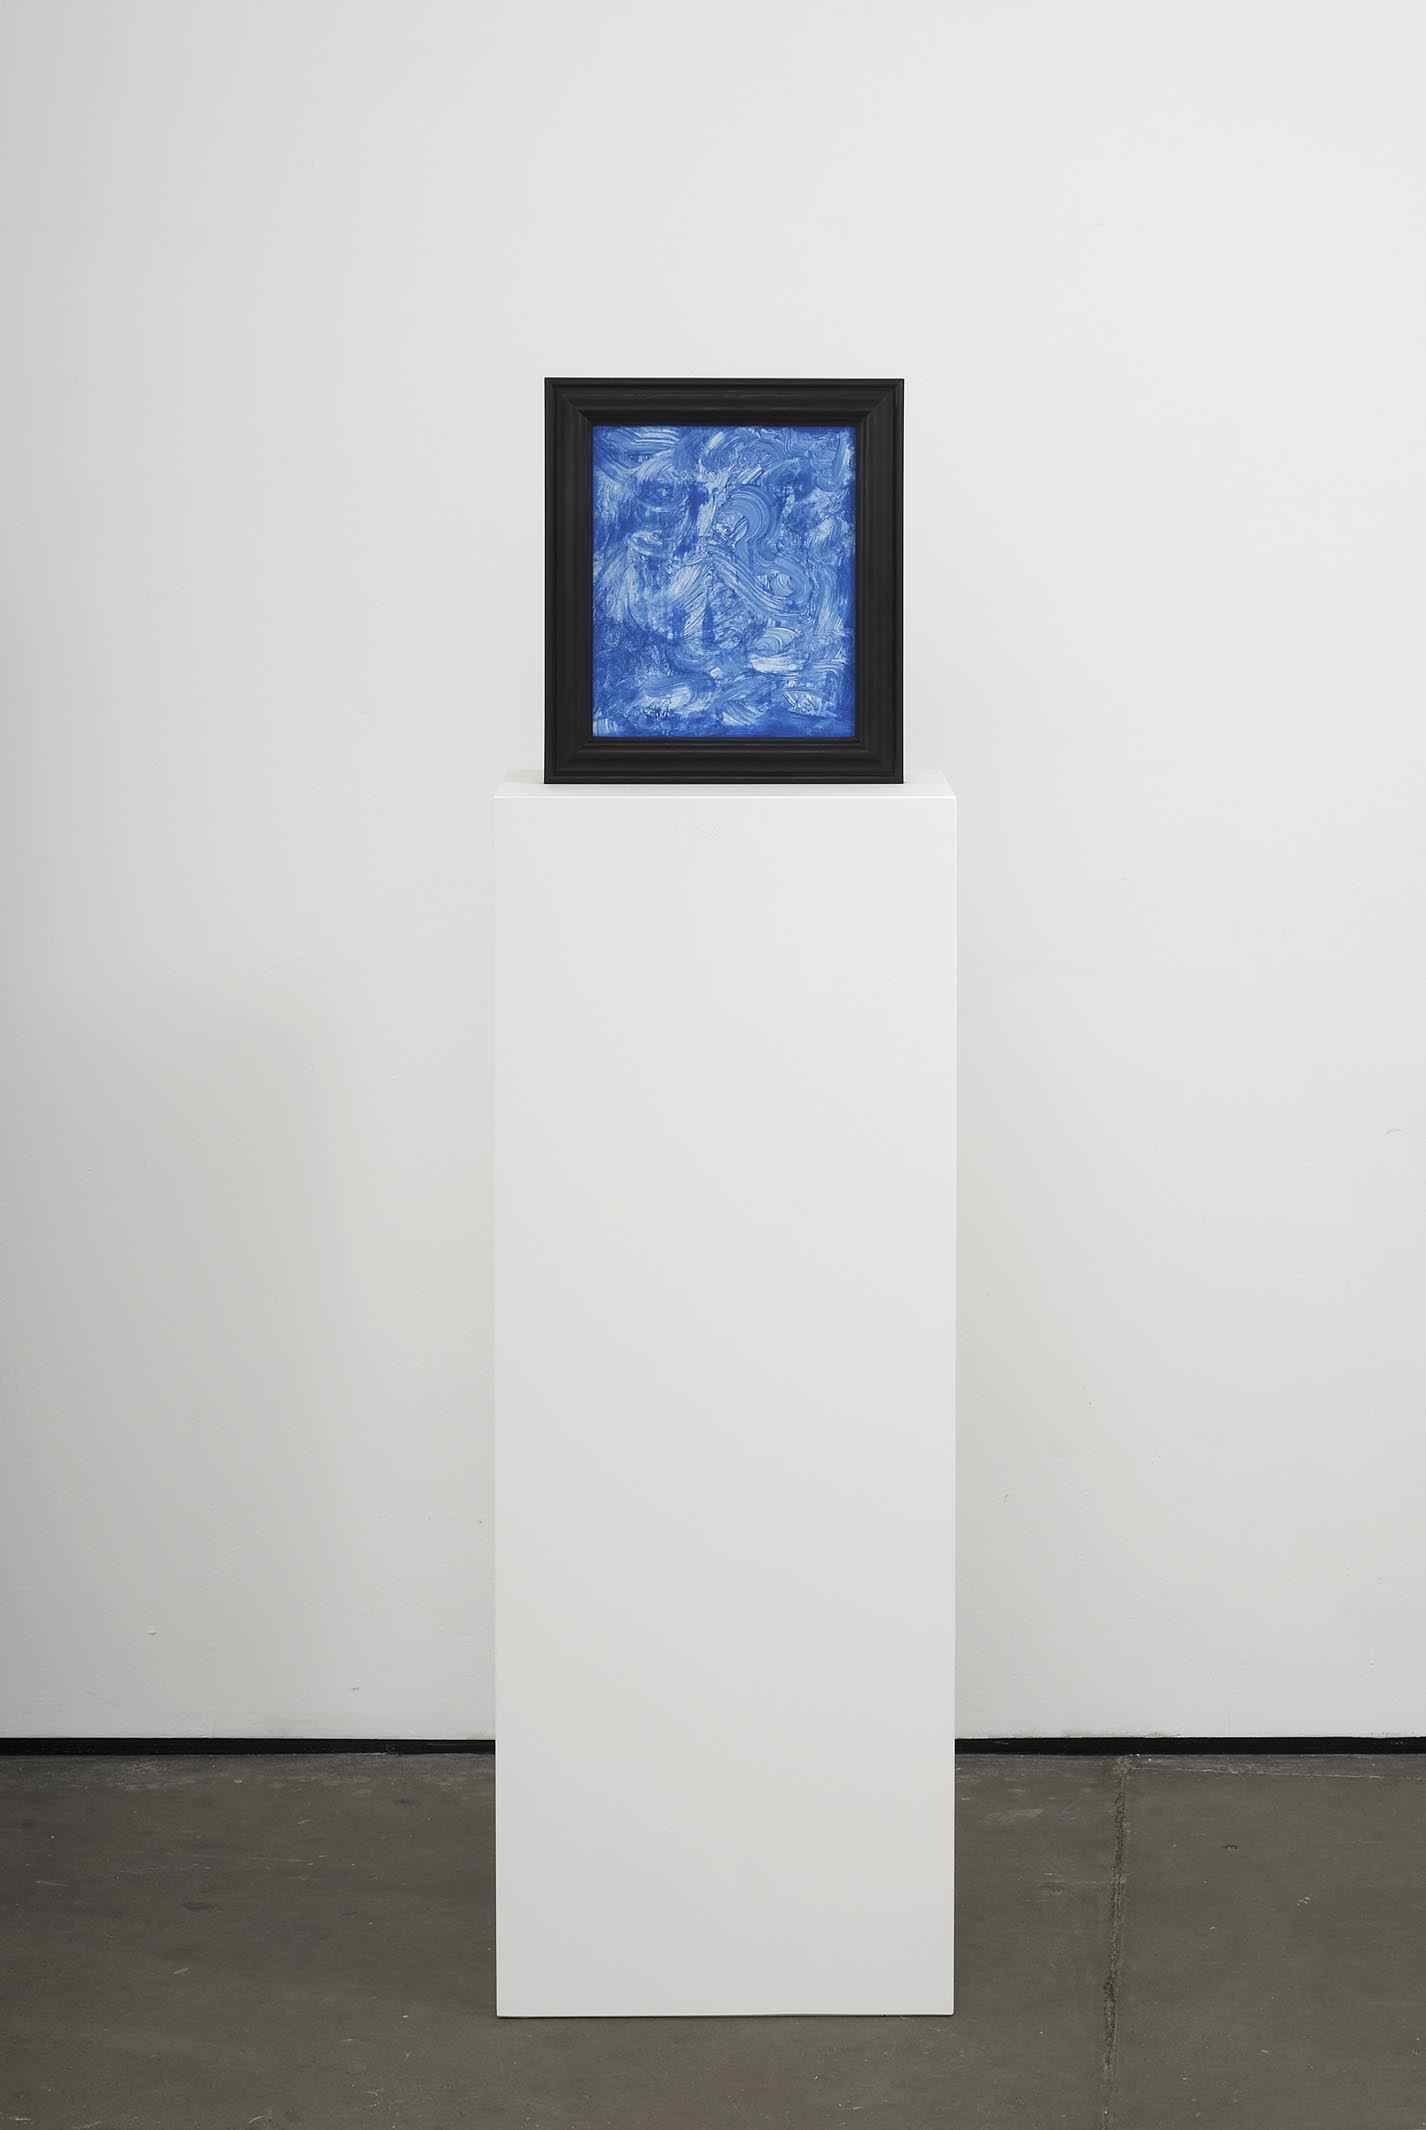      Wondering Sadhus   2009   Double-sided acrylic on board in artists frame mounted on pedestal   147.3 x 40 x 28cm  